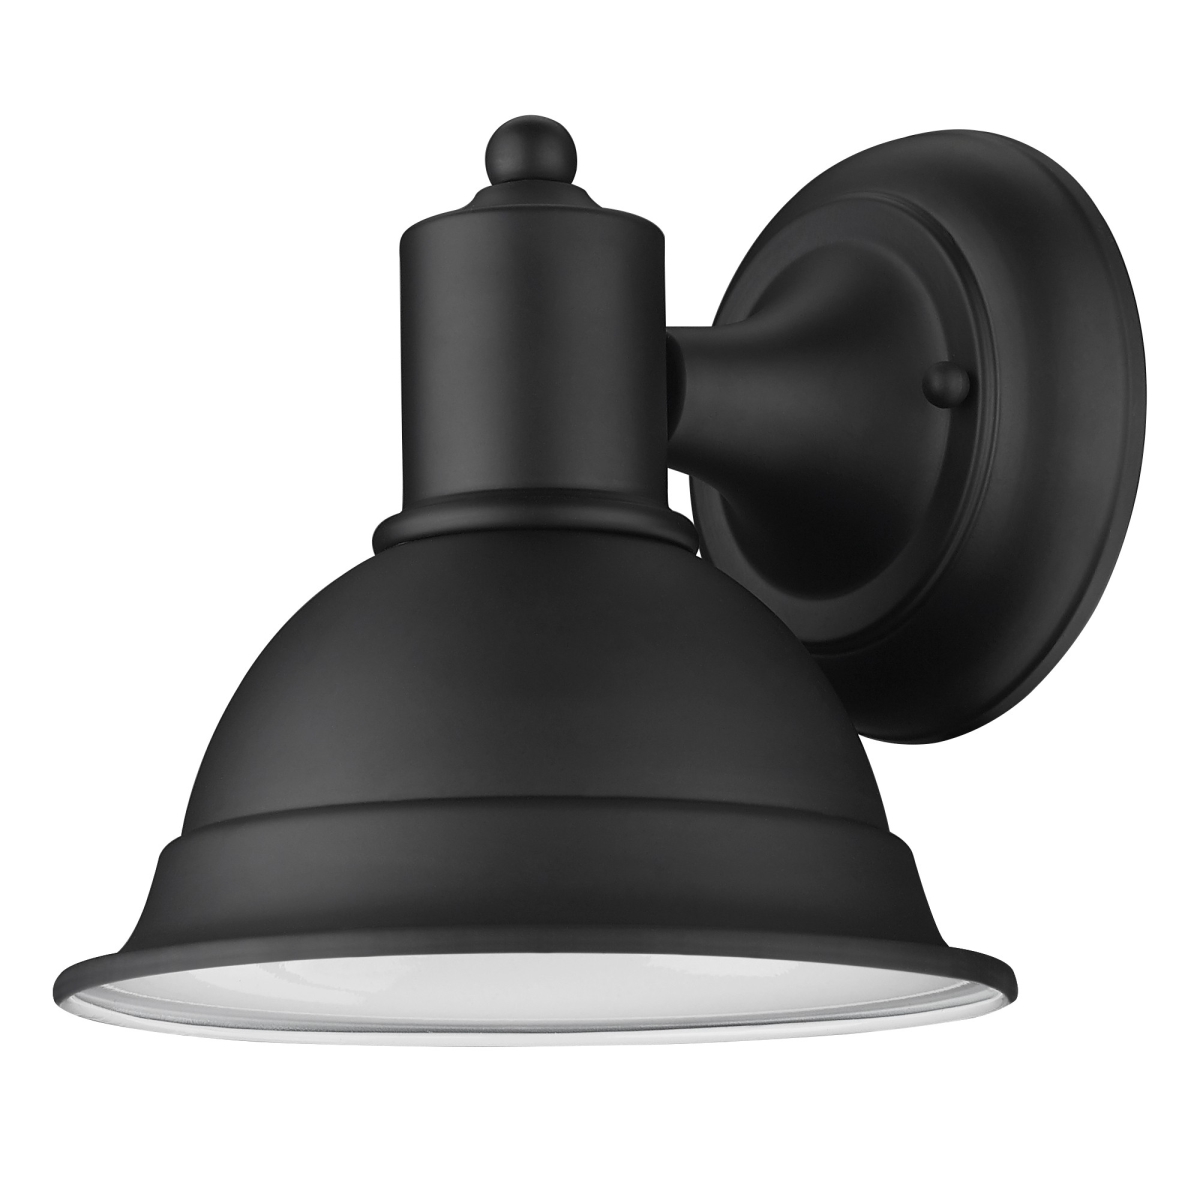 Picture of HomeRoots 398463 8.25 x 8 x 8.5 in. Colton 1-Light Matte Black Wall Light